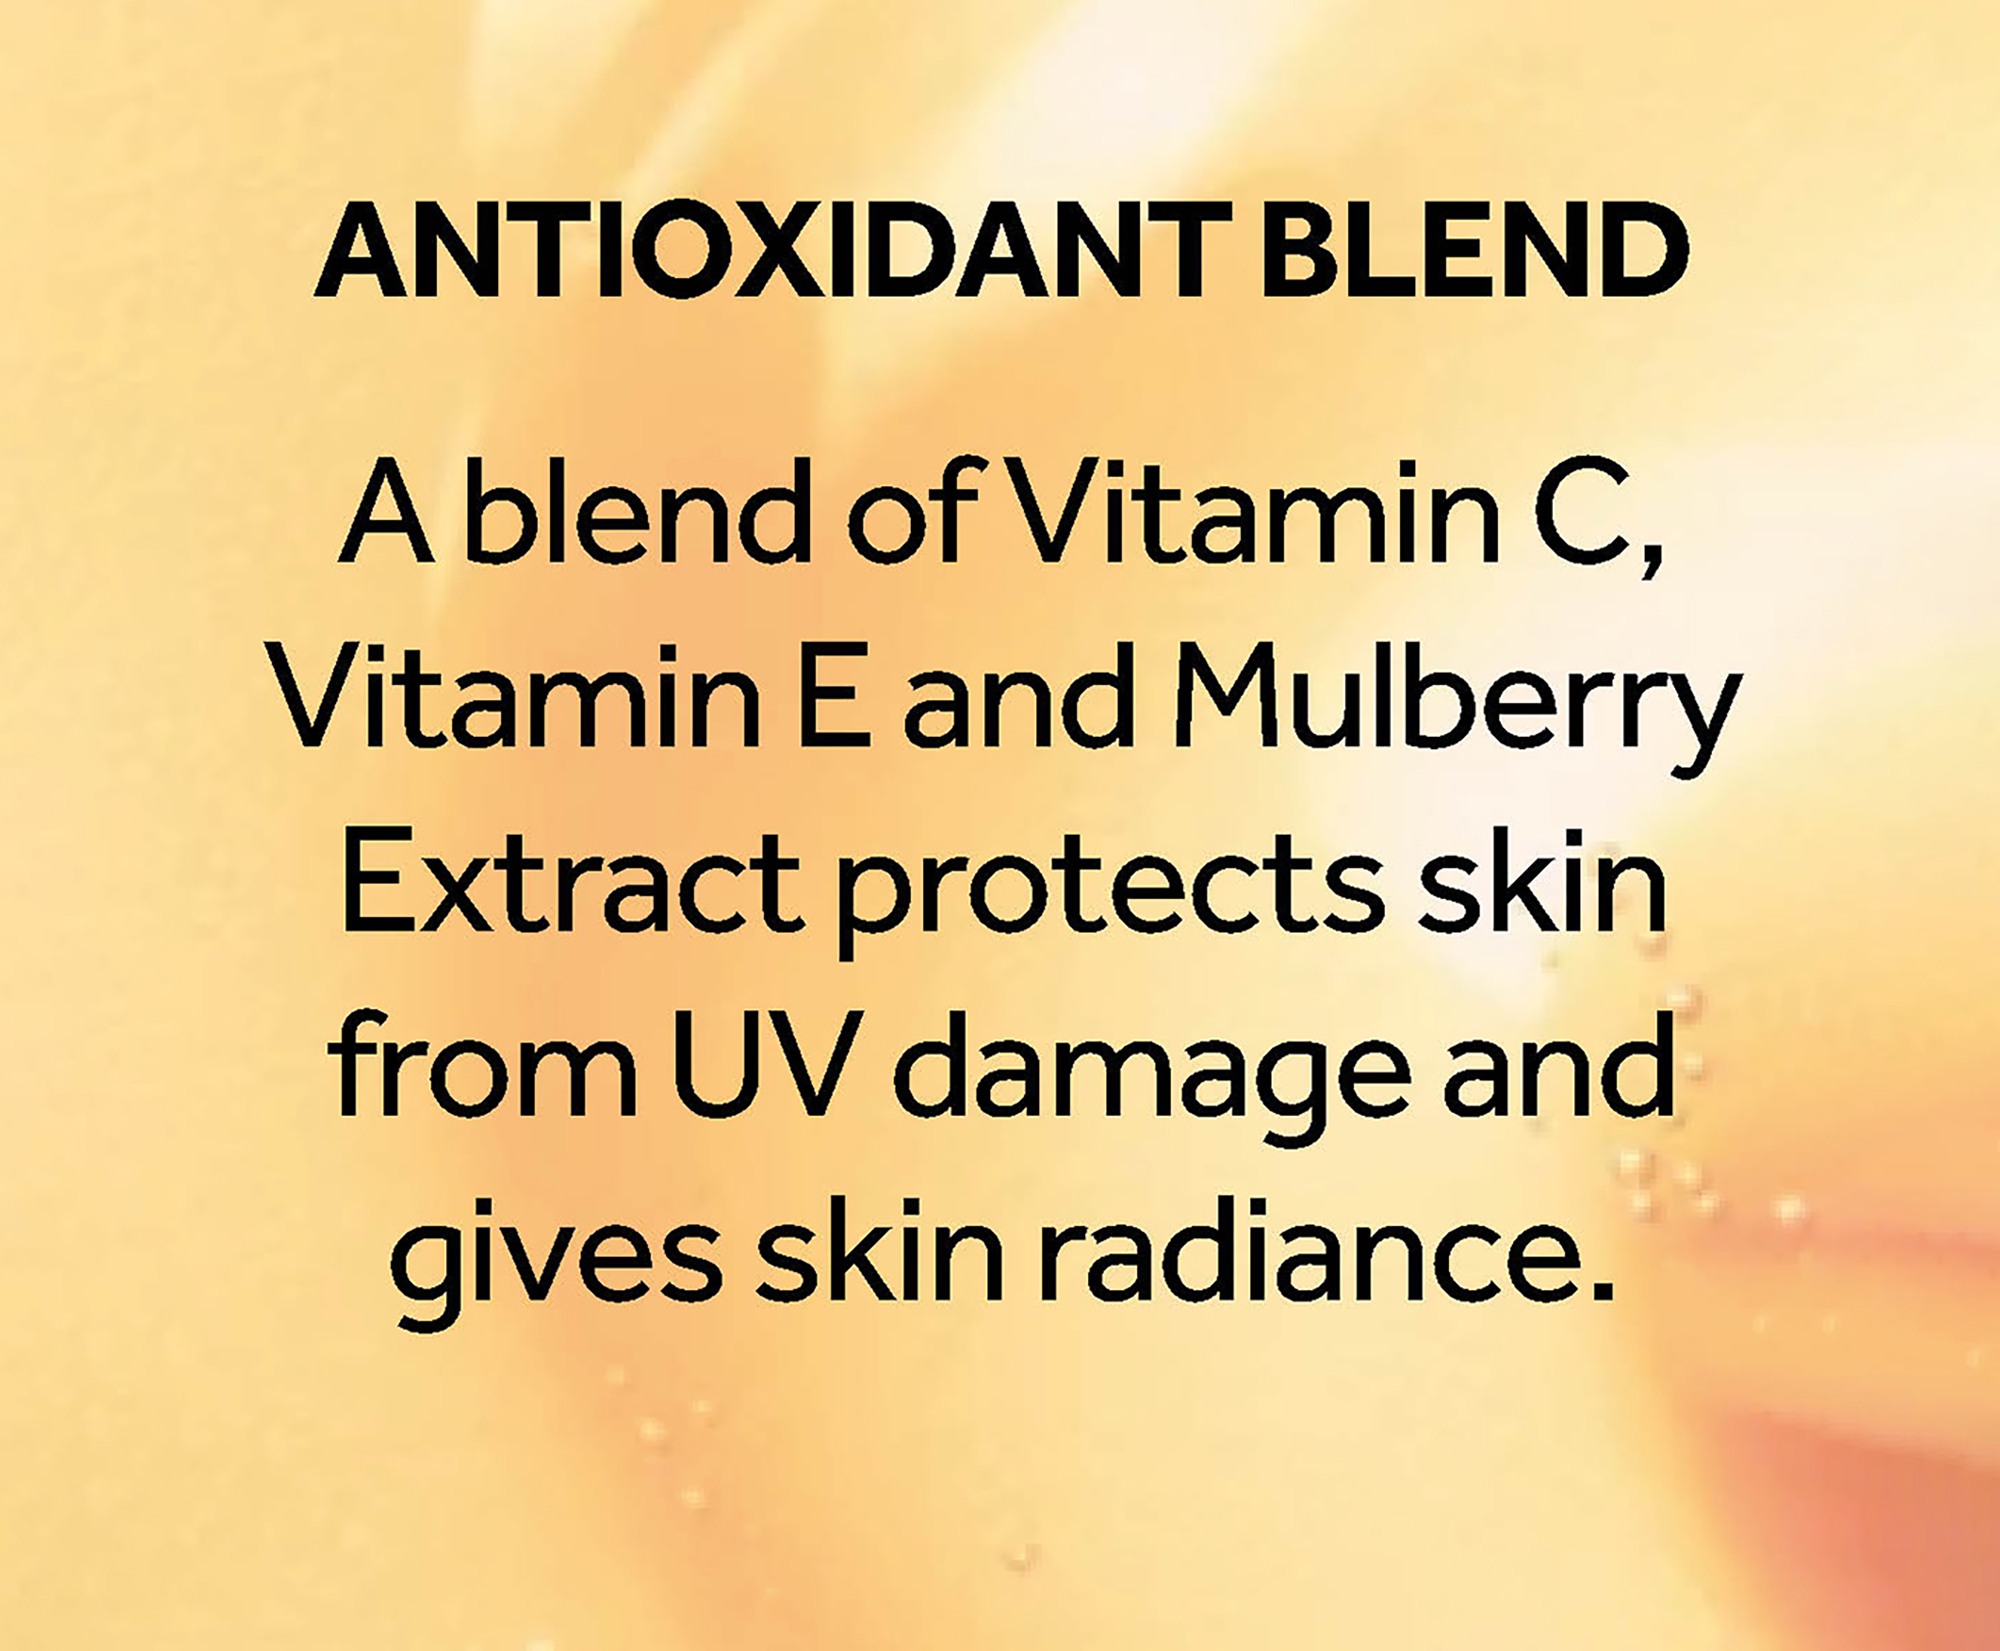 Antioxidant blend. A blend of Vitamin C, Vitamin E and Mulberry Extract protects skin from UV damage and gives skin radiance.